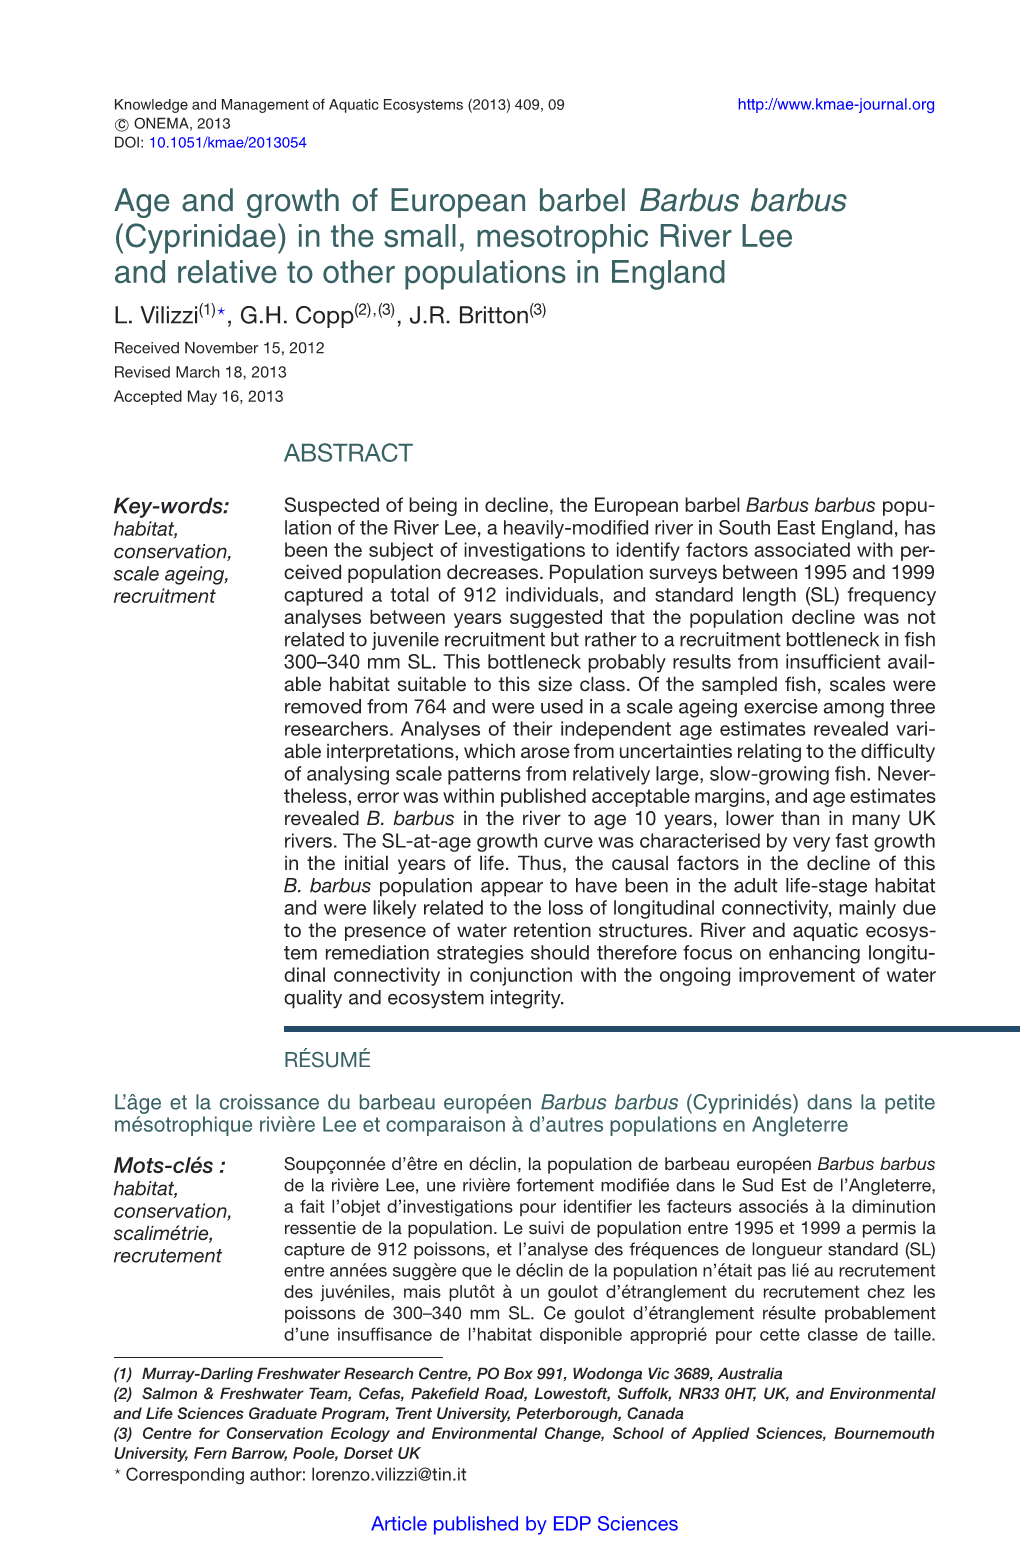 Age and Growth of European Barbel Barbus Barbus (Cyprinidae) in the Small, Mesotrophic River Lee and Relative to Other Populations in England L